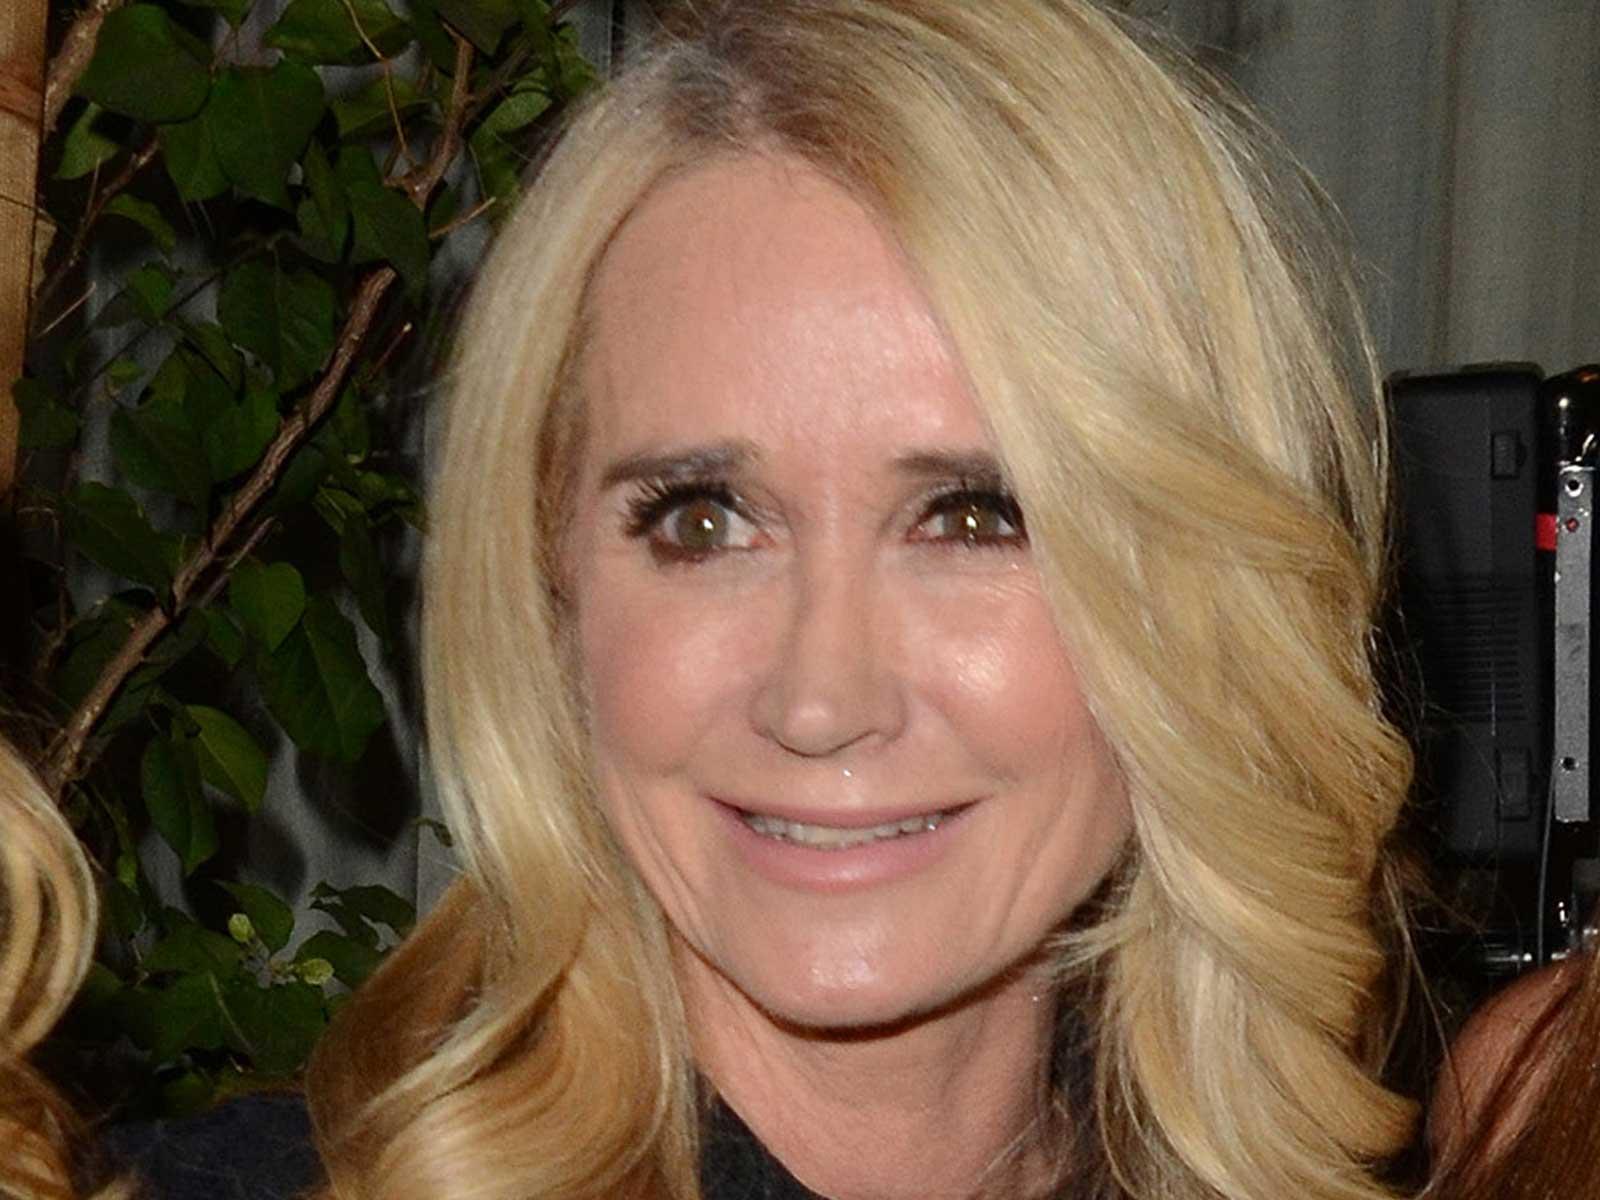 ‘RHOBH’ Star Kim Richards Hit with $266k Judgment Over Pit Bull Attack